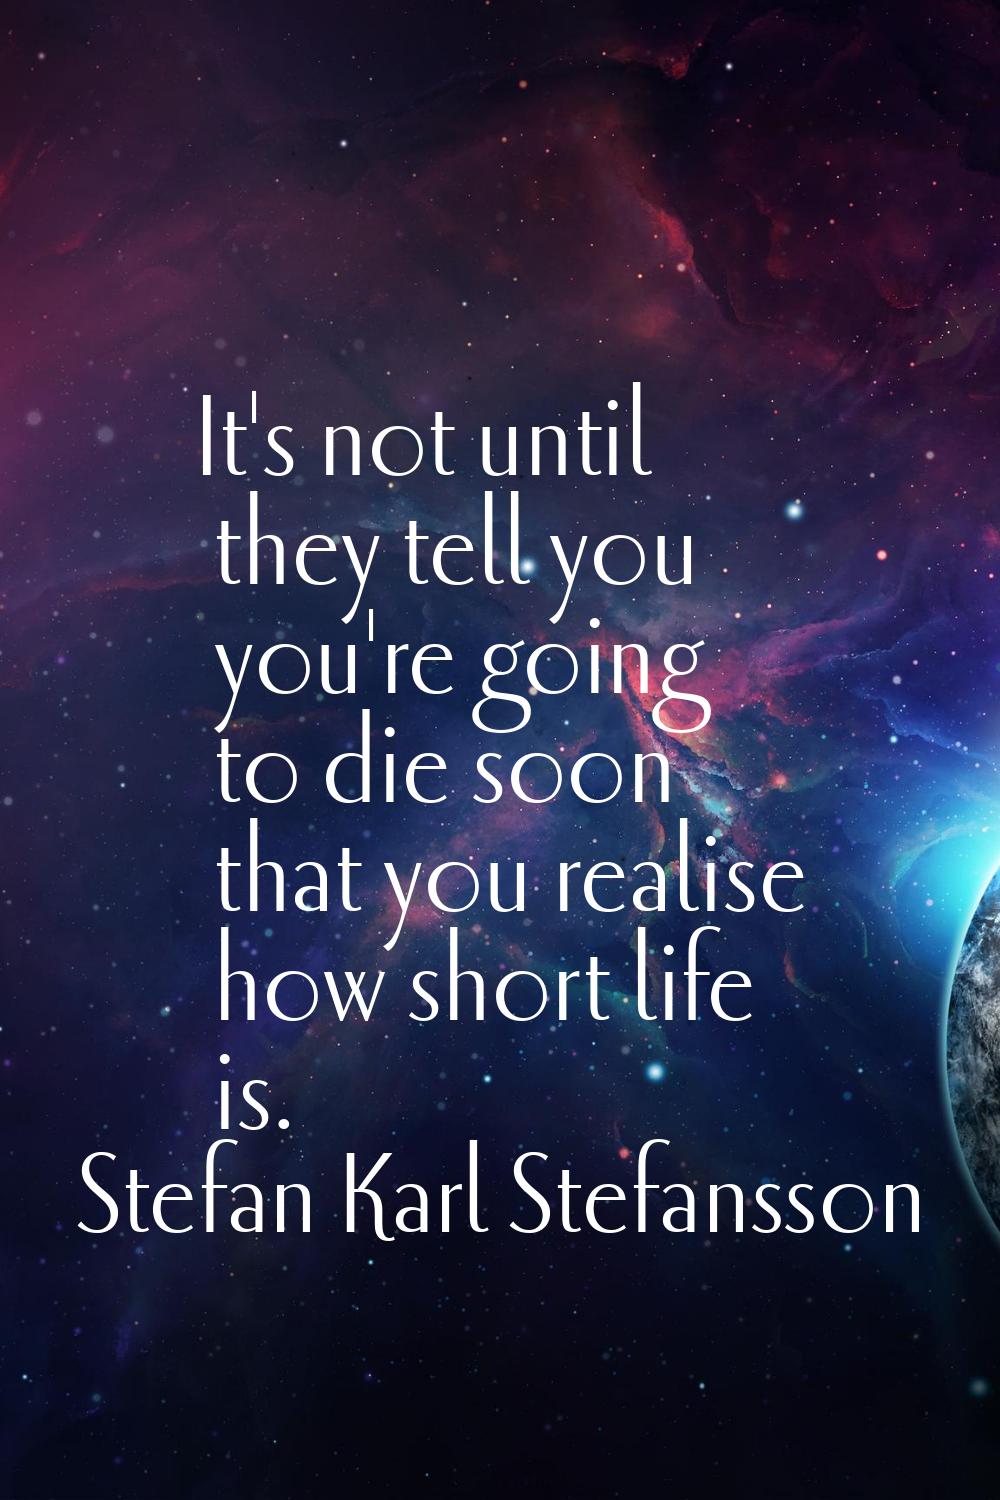 It's not until they tell you you're going to die soon that you realise how short life is.